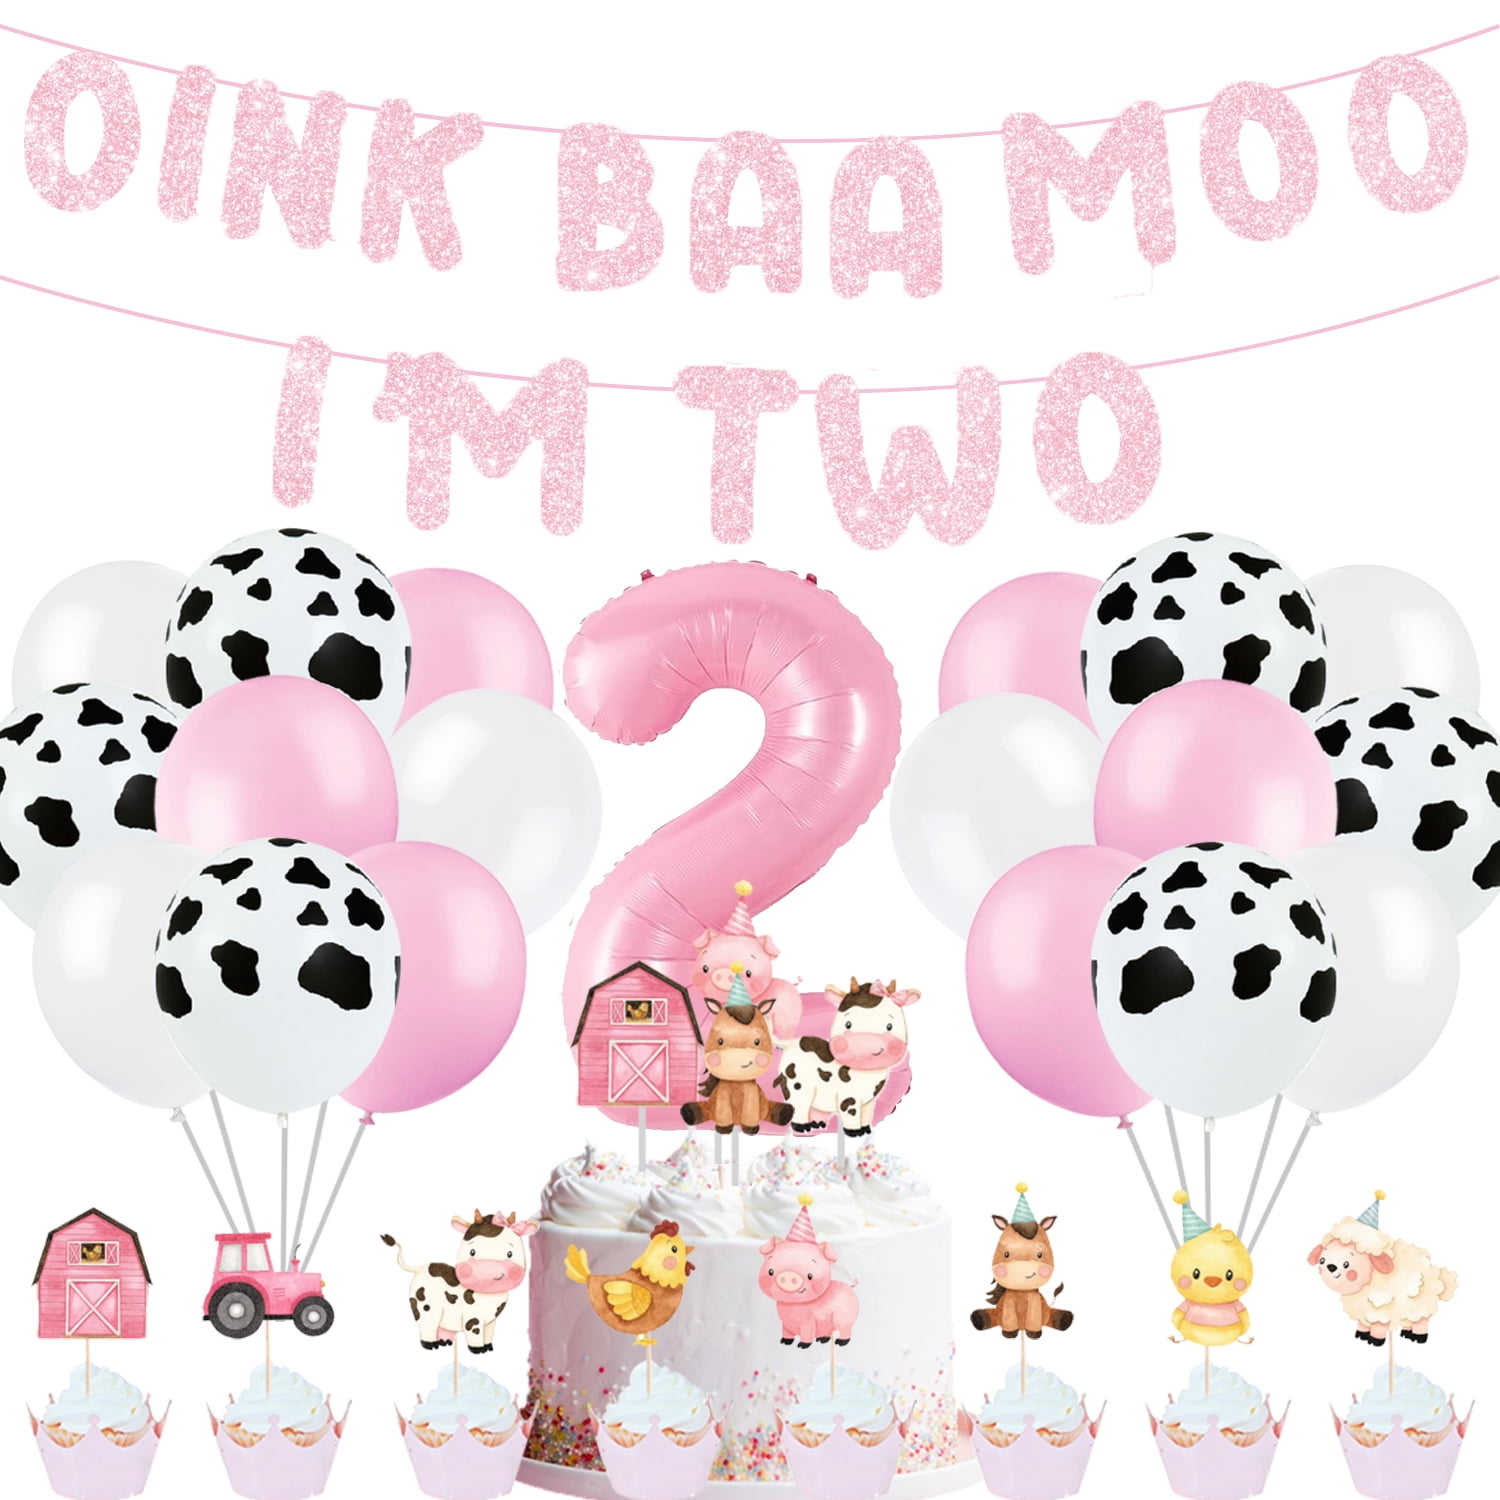  Moo Moo Im Two Farm Cow 2nd Birthday 2 Years Old Kid Toddler  PopSockets Swappable PopGrip : Cell Phones & Accessories